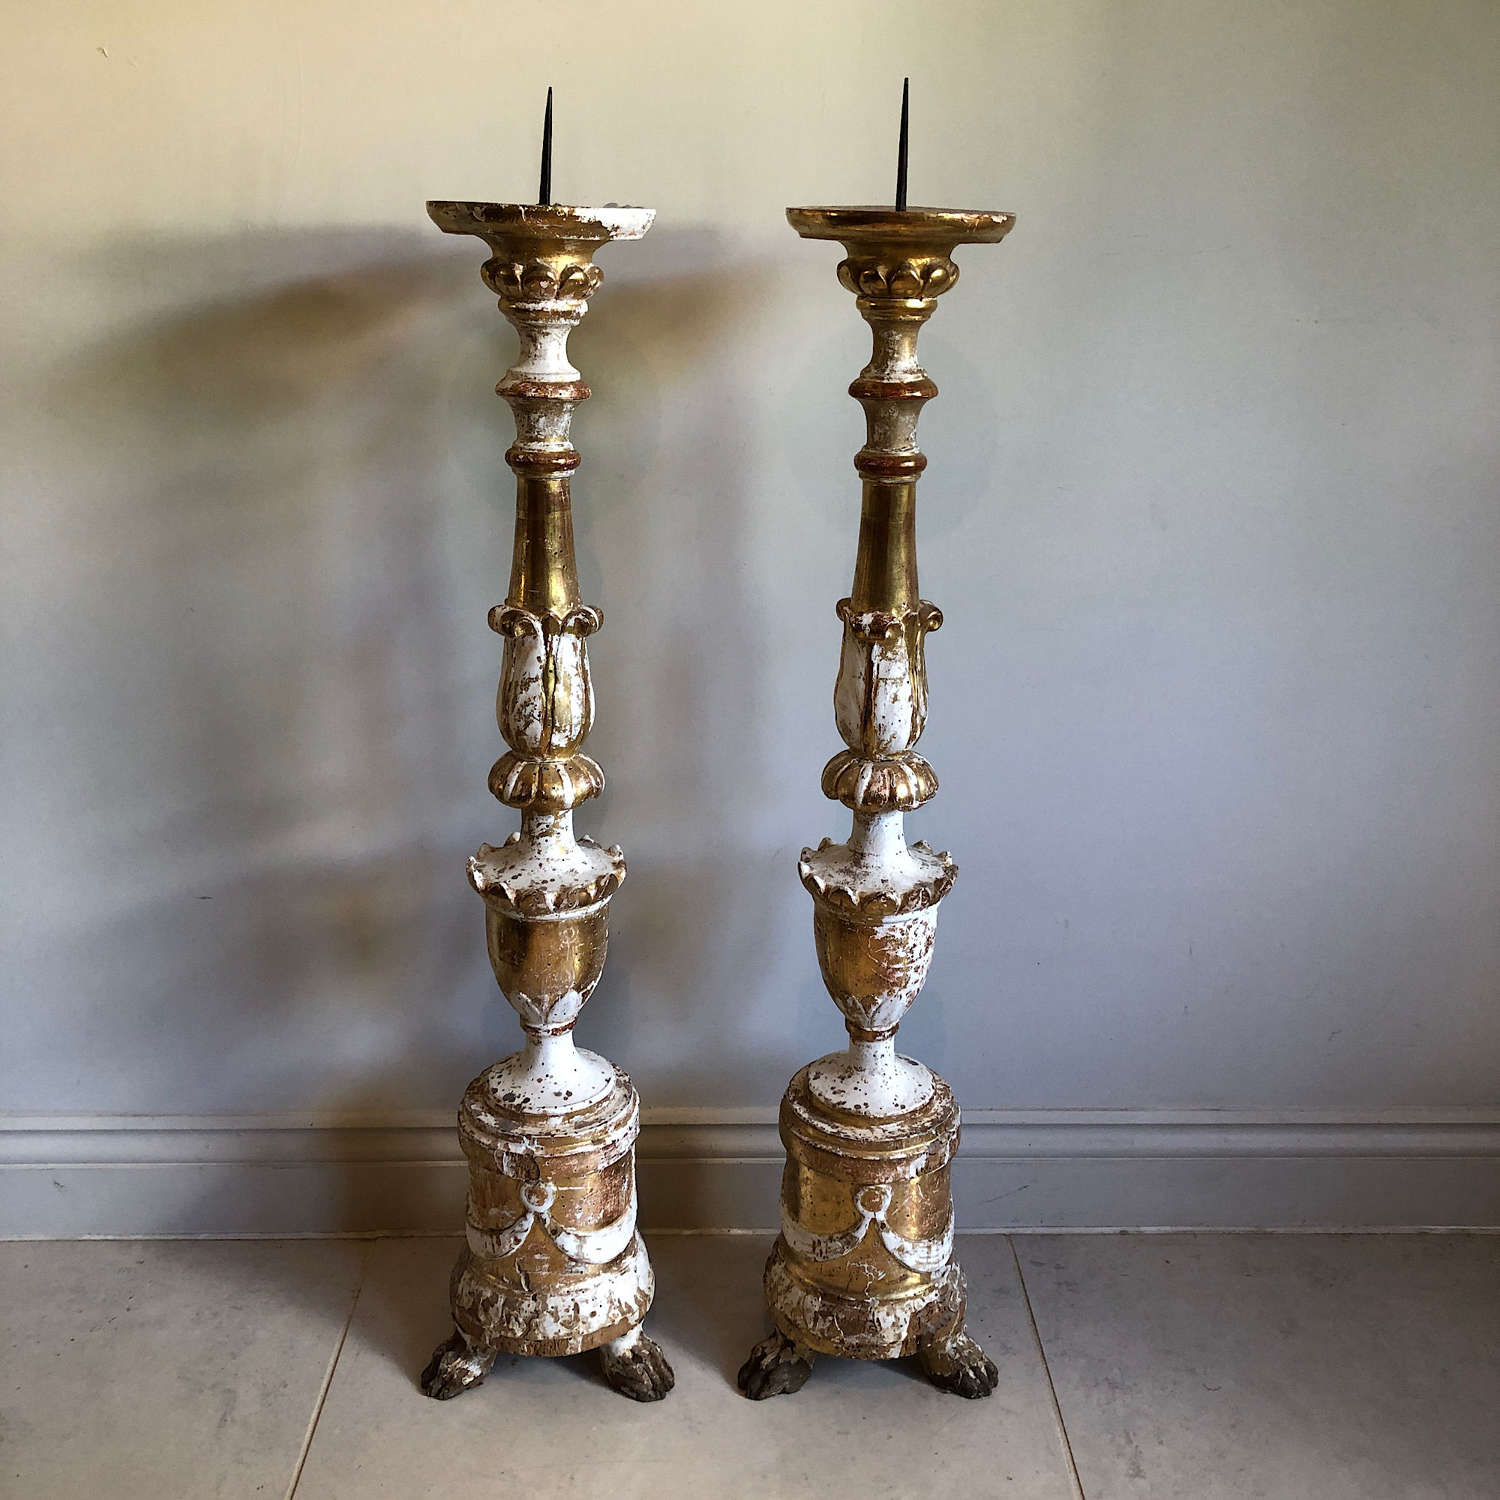 A pair of 18thC Swedish candle prickets